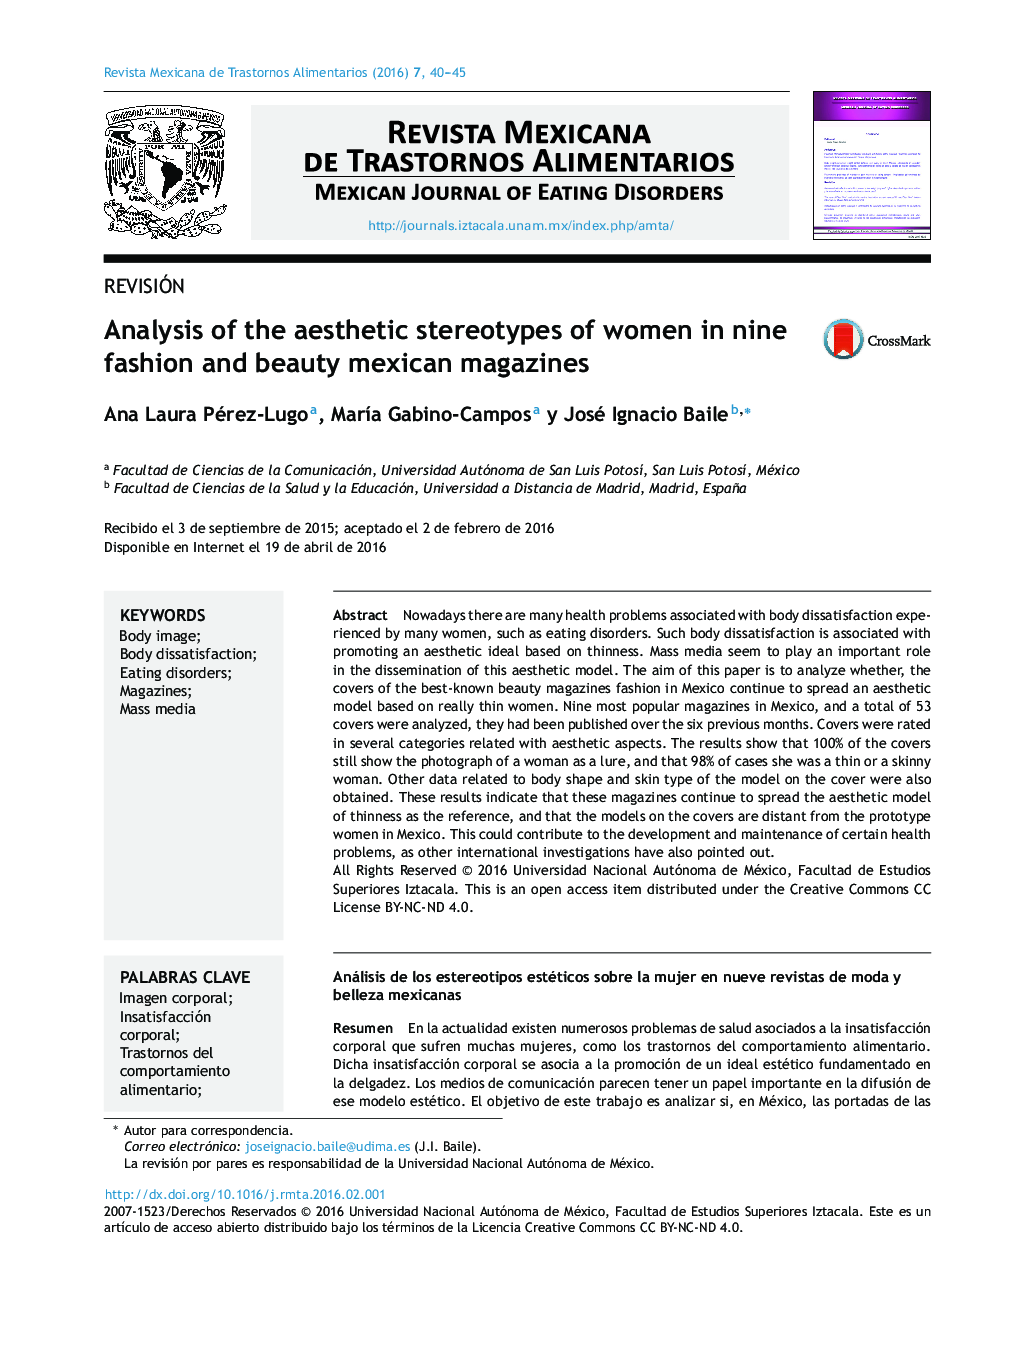 Analysis of the aesthetic stereotypes of women in nine fashion and beauty mexican magazines 